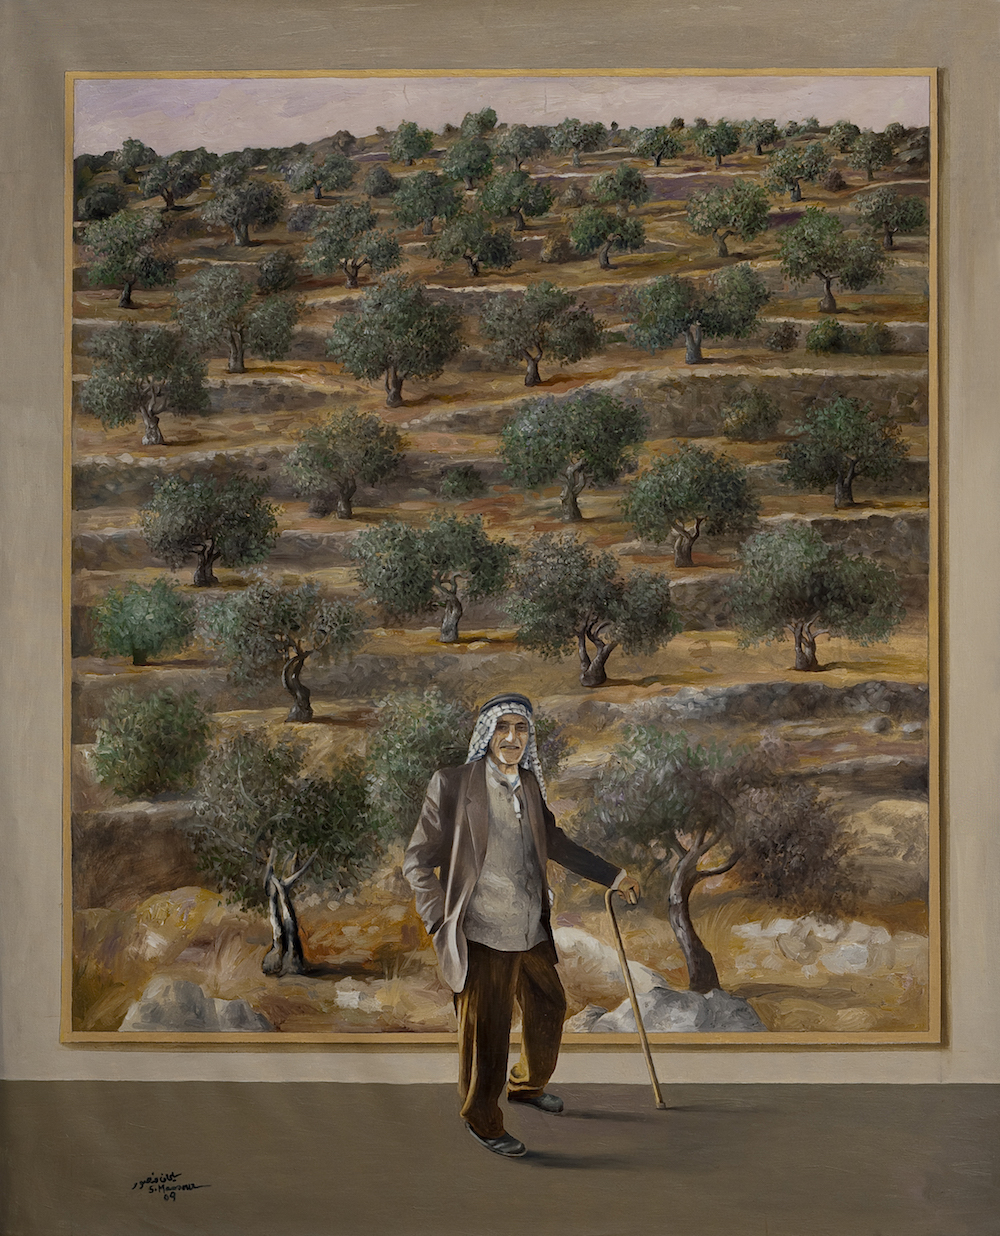 Olive trees have for centuries provided a steady source of income from the sale of their fruit and the silky, golden oil derived from it - and encapsulate the Palestinian identity wholly. (Supplied/Sliman Mansour)